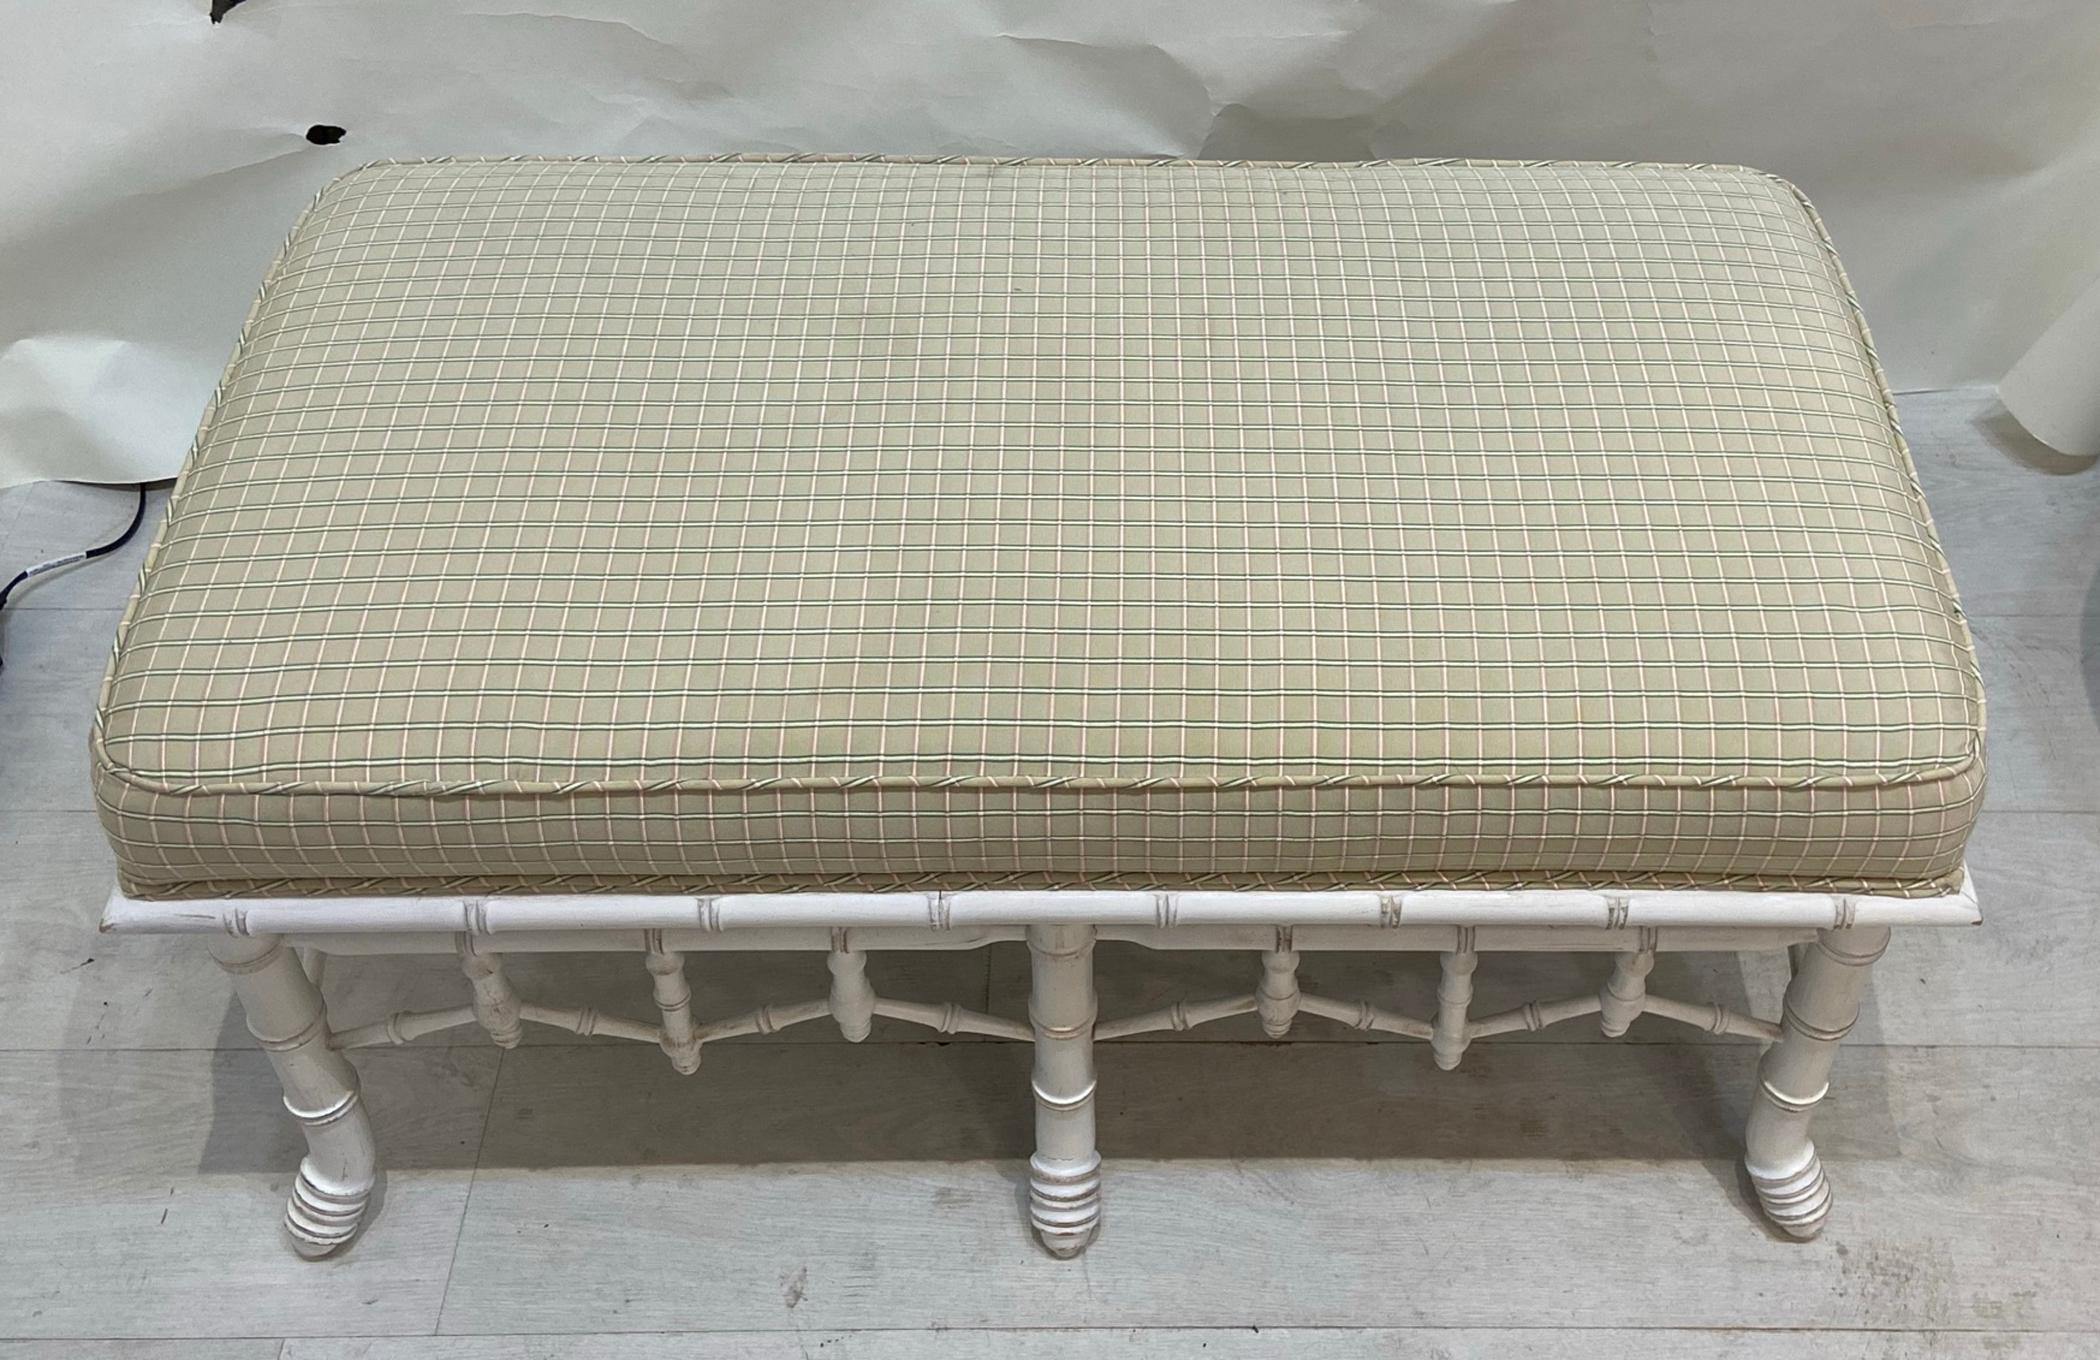 Large square bench or pouf could probably even be modified into a cocktail or coffee table. Original fabric in used condition. Quality construction built to last.